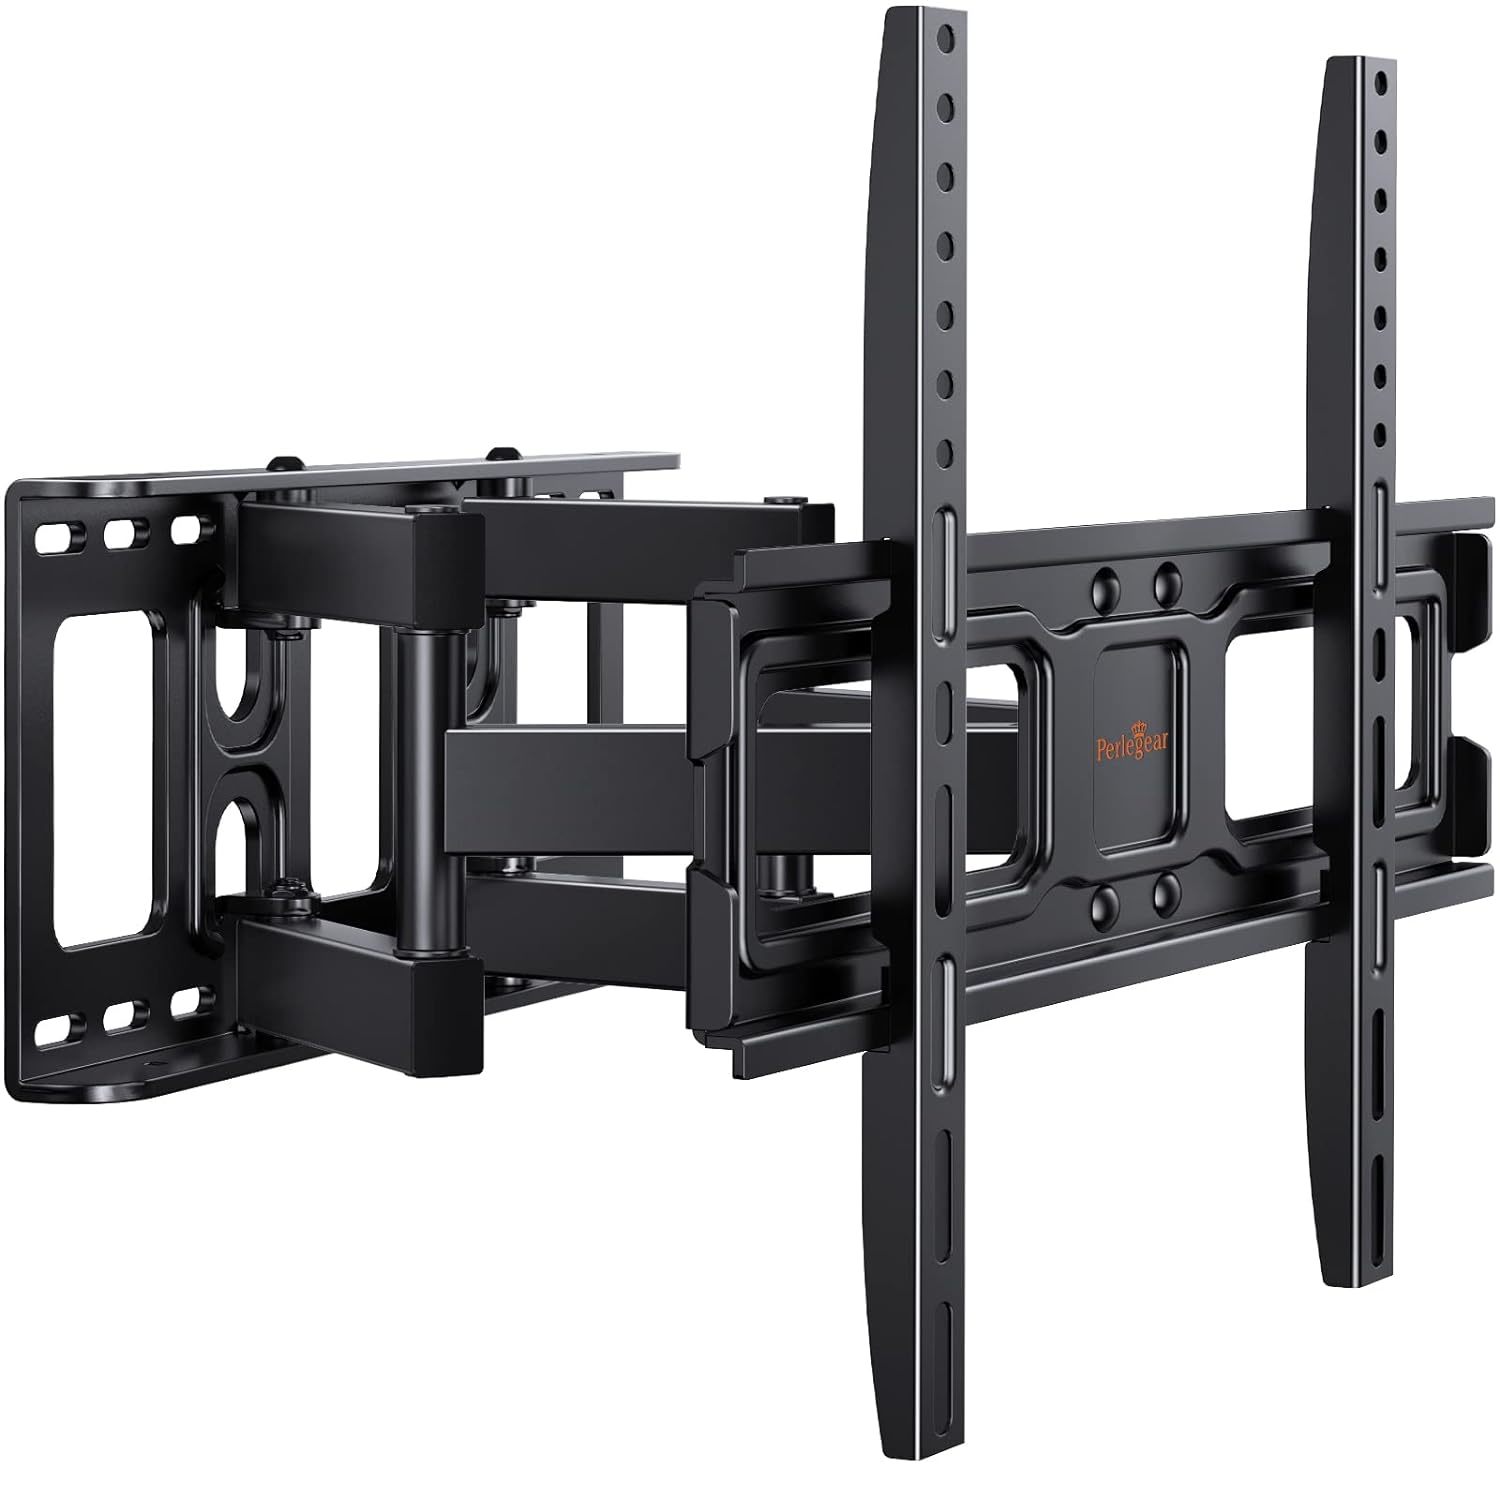 Primary image for Tv Wall Mount Bracket Full Motion For 26-65 Inch Led, Lcd, Oled Flat Curved Tvs,